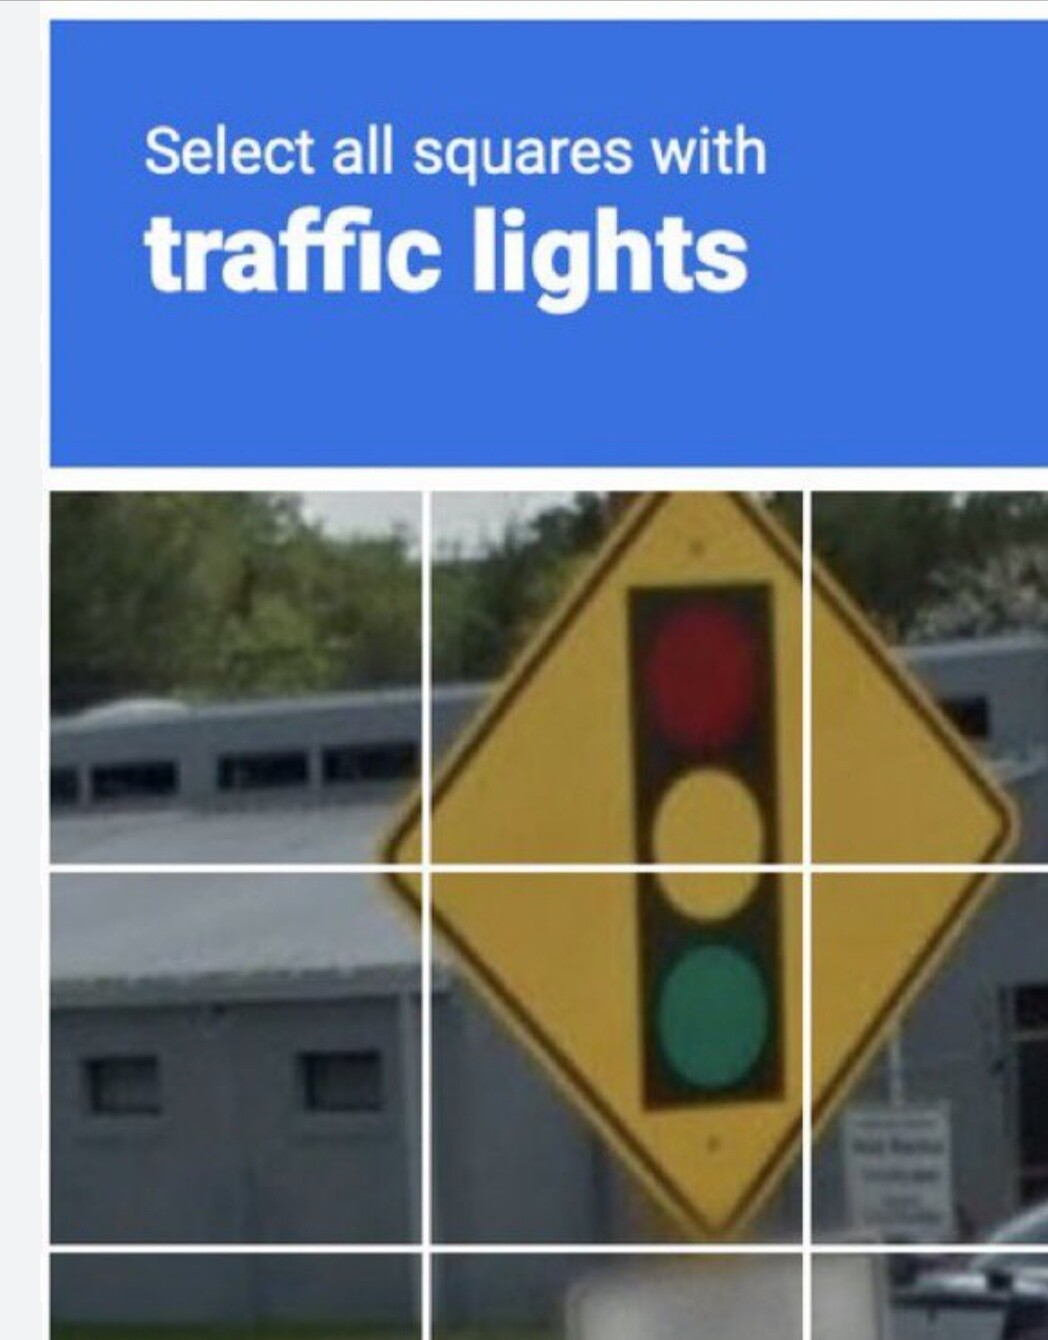 Screenshot of one of those ubiquitous train-my-AI-please are-you-human test, showing a picture of an amber diamond sign with a graphic of a traffic semaphore on it, above which the user is instructed "Select all squares with traffic lights"